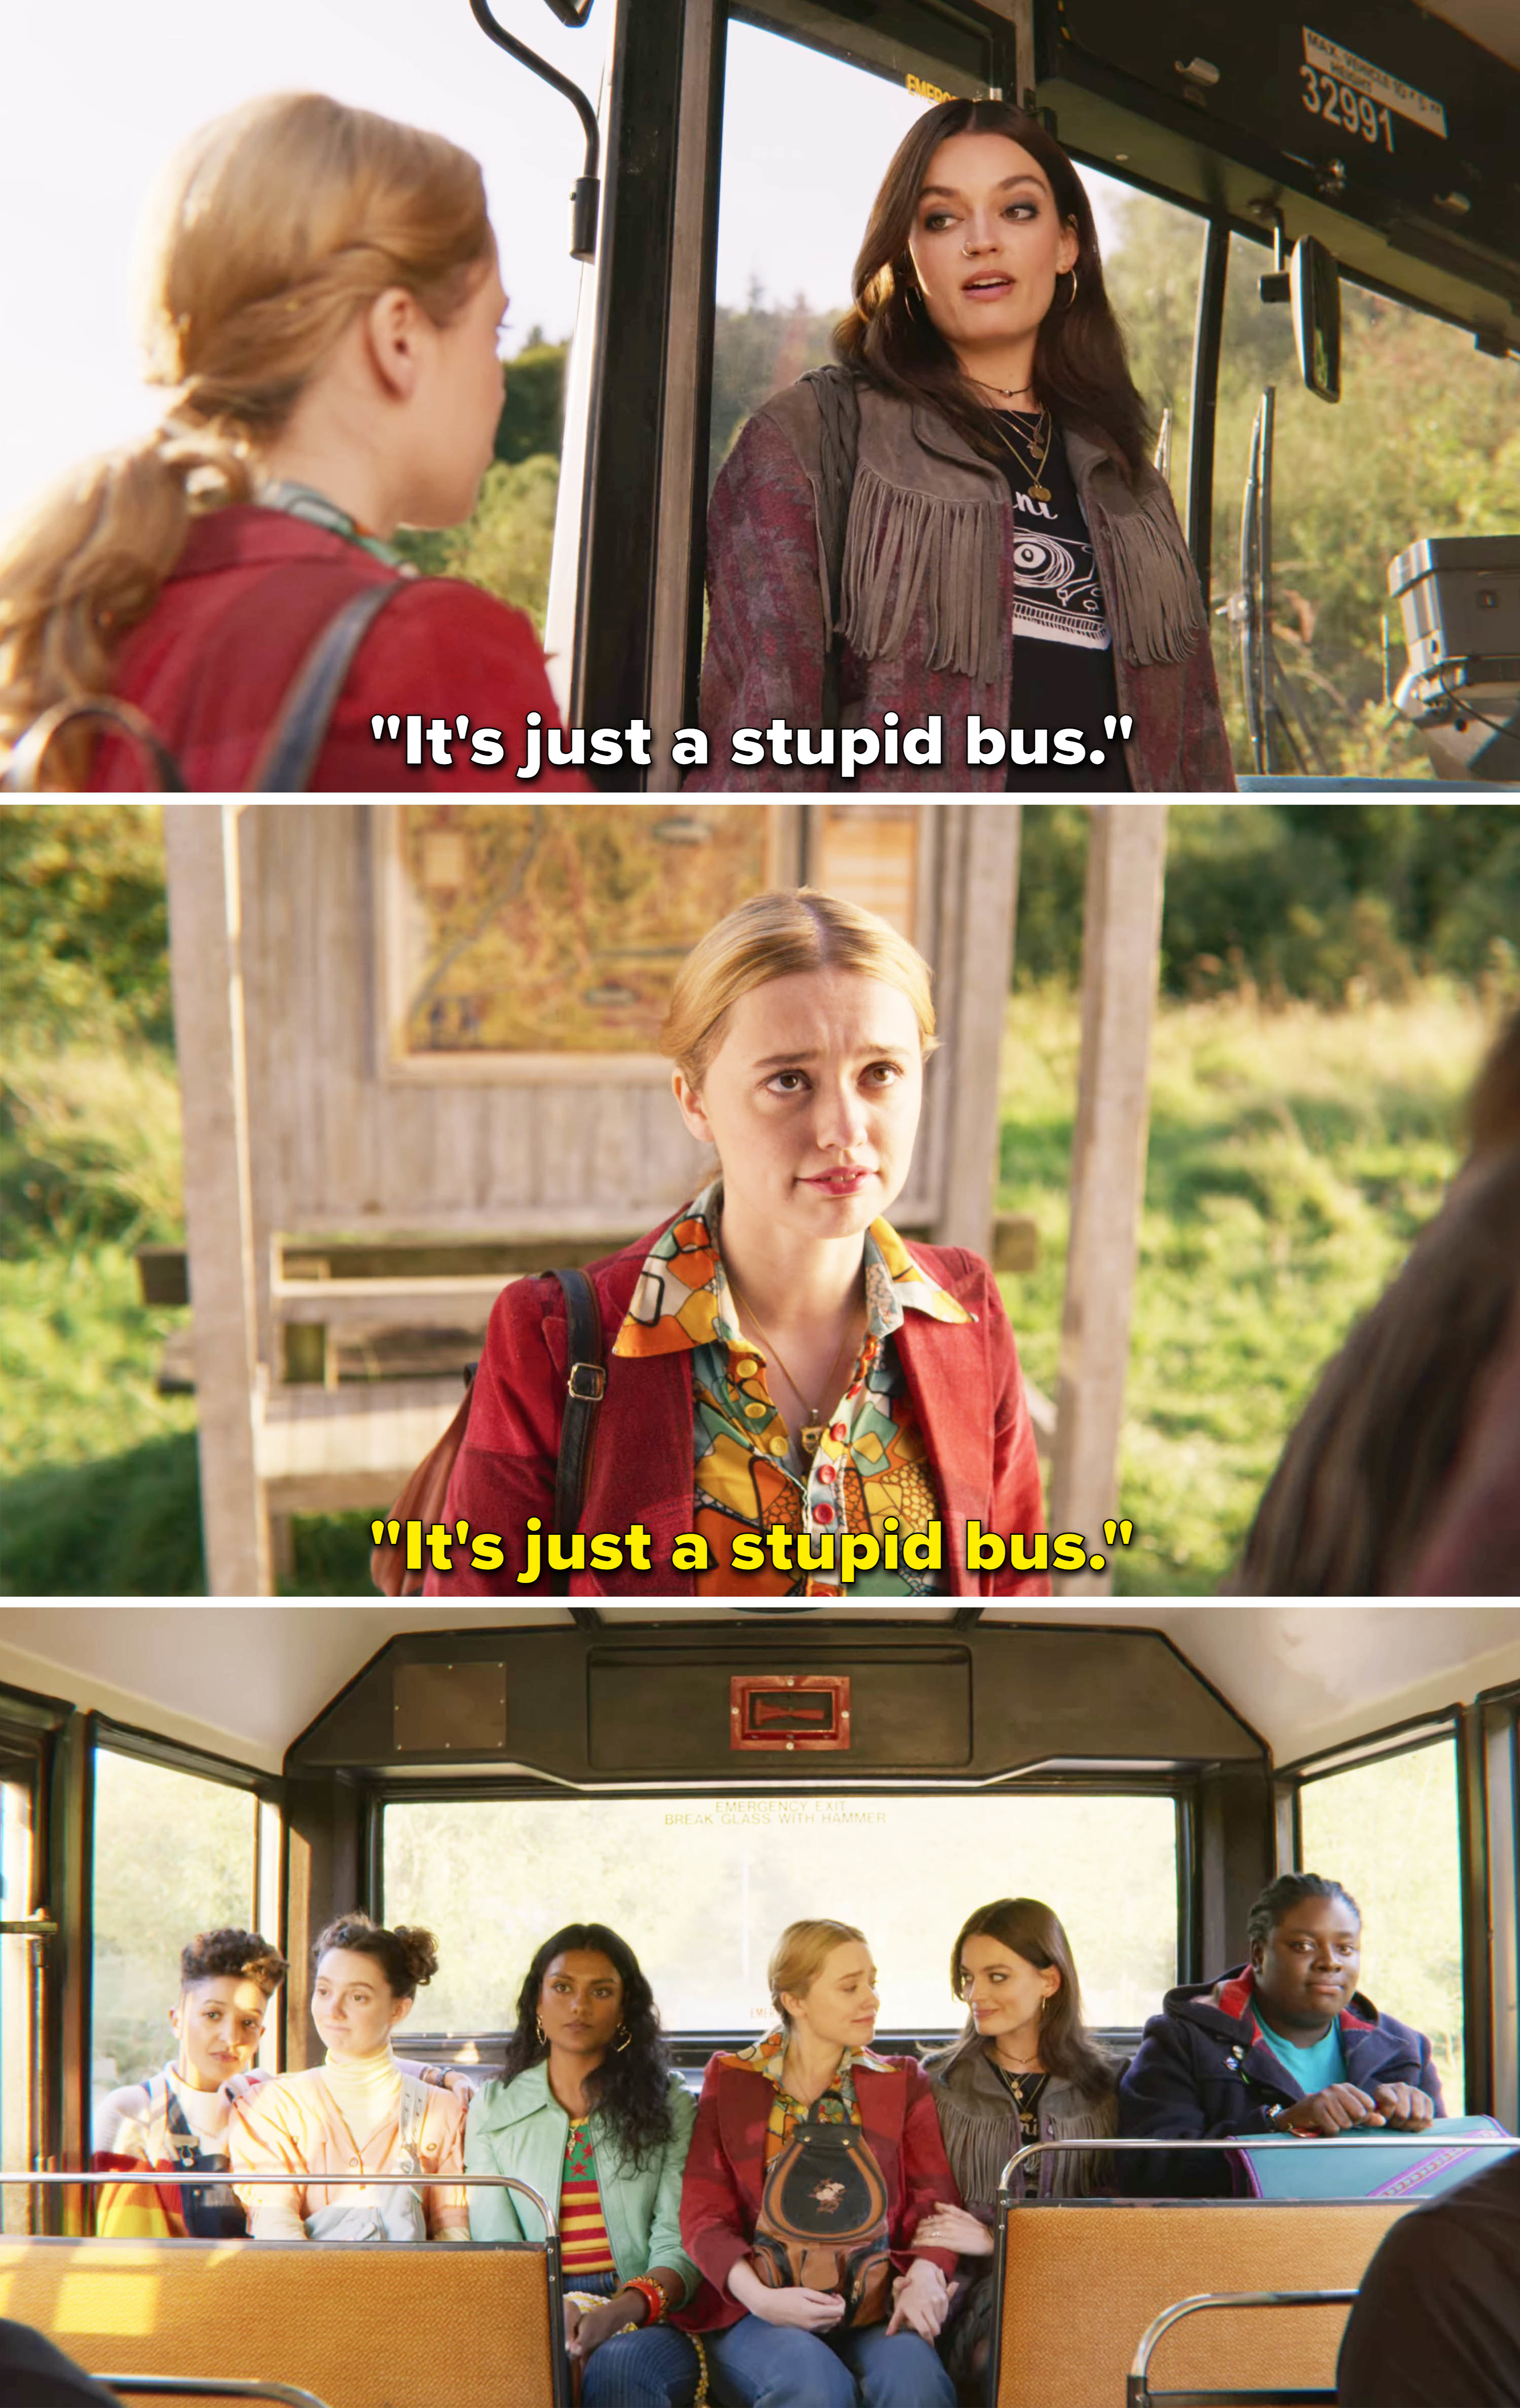 character says it&#x27;s just a stupid bus as someone gets on and then shows a group sitting together on the long back seat